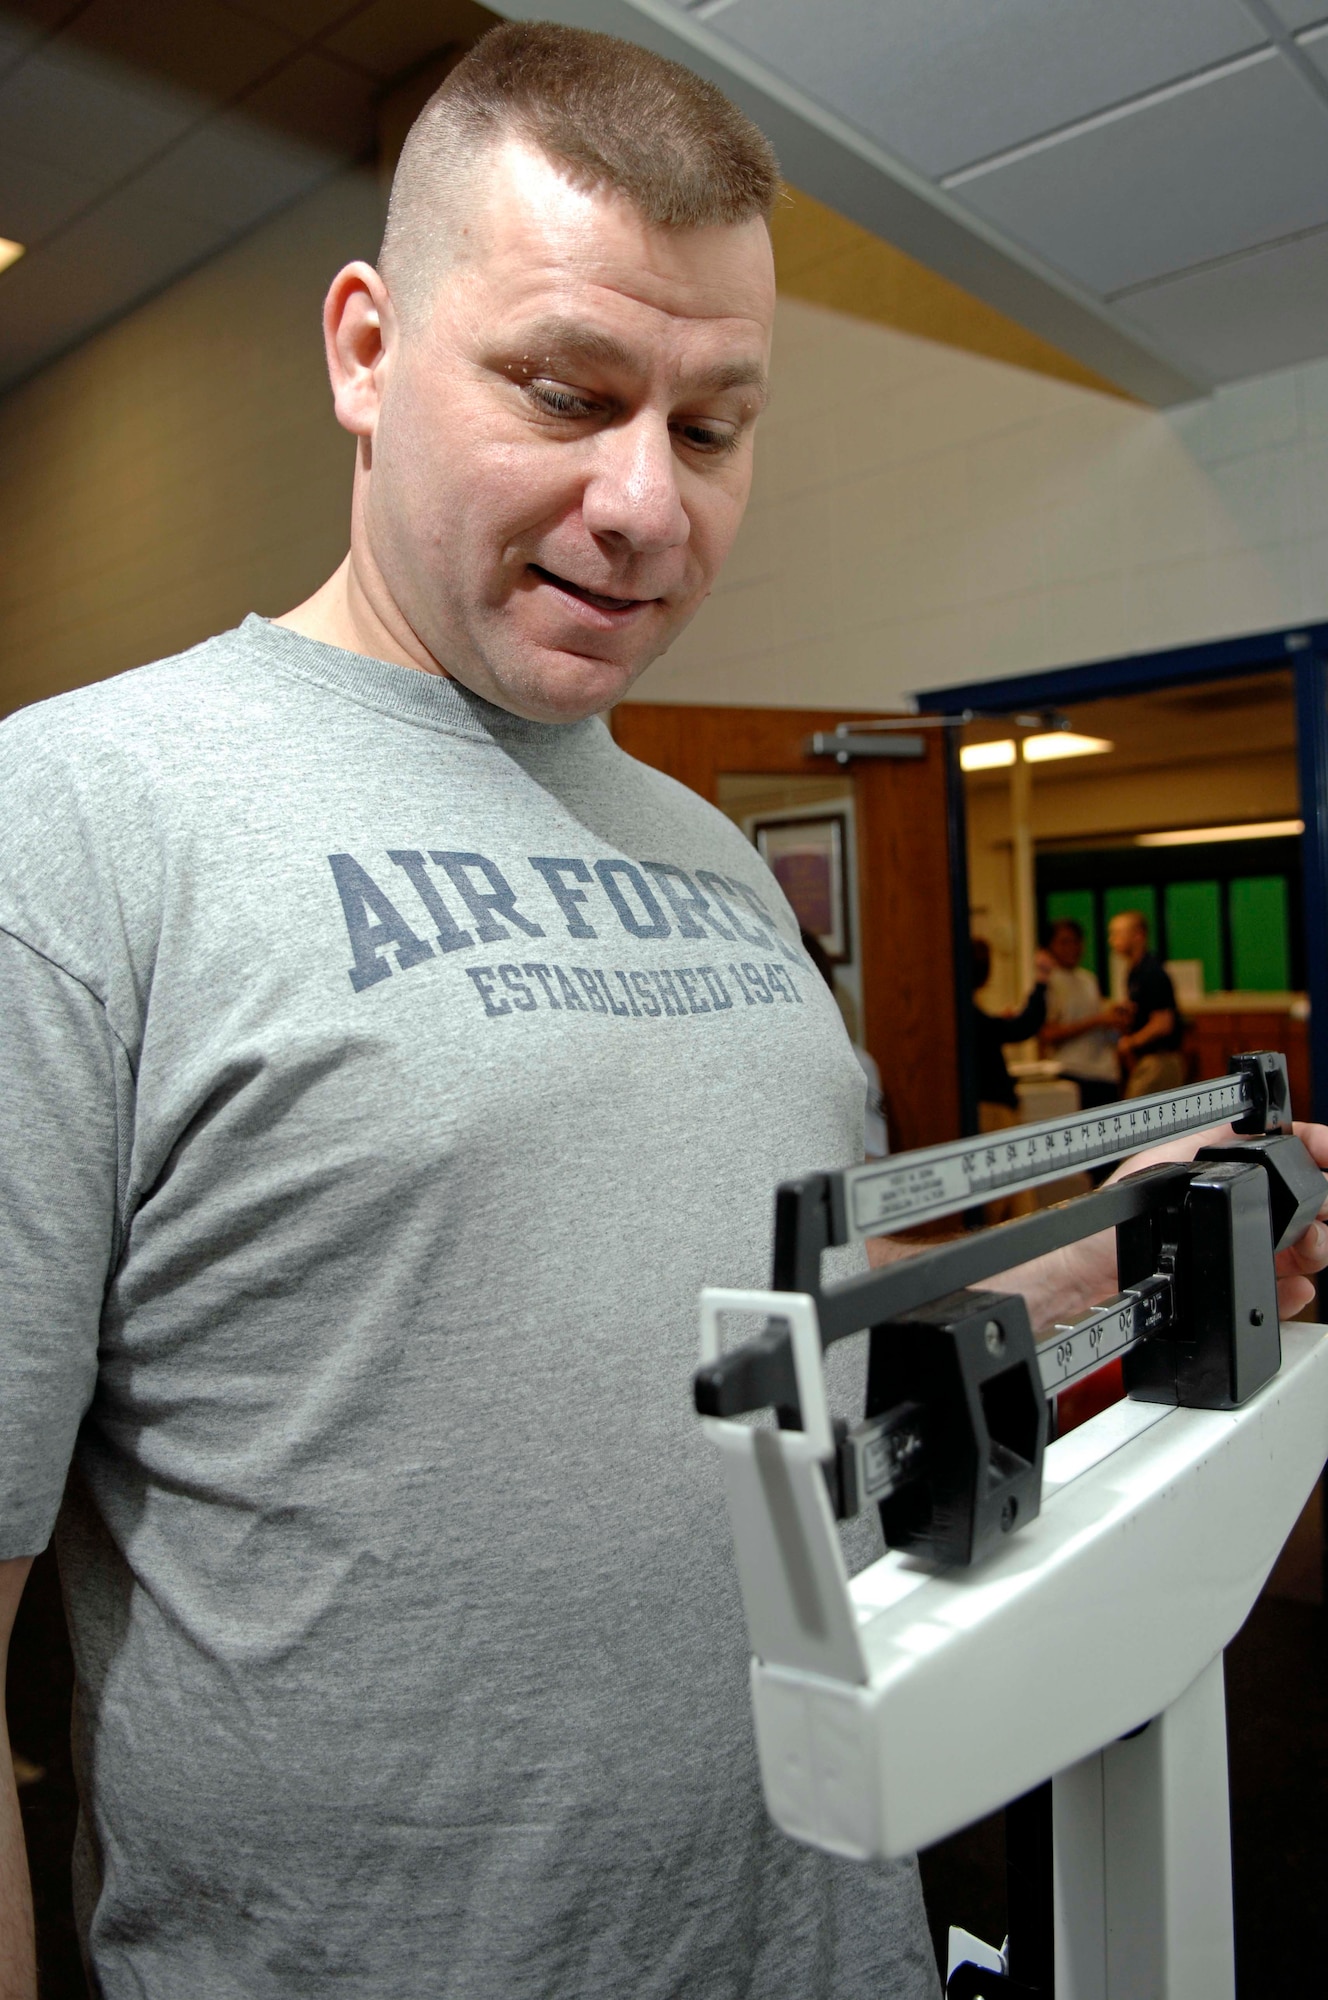 Staff Sgt. Kevin Pike, 28th Bomb Wing chaplain assistant, carefully weighs himself during the final weigh-in for the Bellamy Fitness Center's "Biggest Loser" competition, March 10. Sergeant Pike competed against 70 other participants to win the title of the fitness center's "Biggest Loser." (U.S. Air Force photo/Airman 1st Class Abigail Klein)